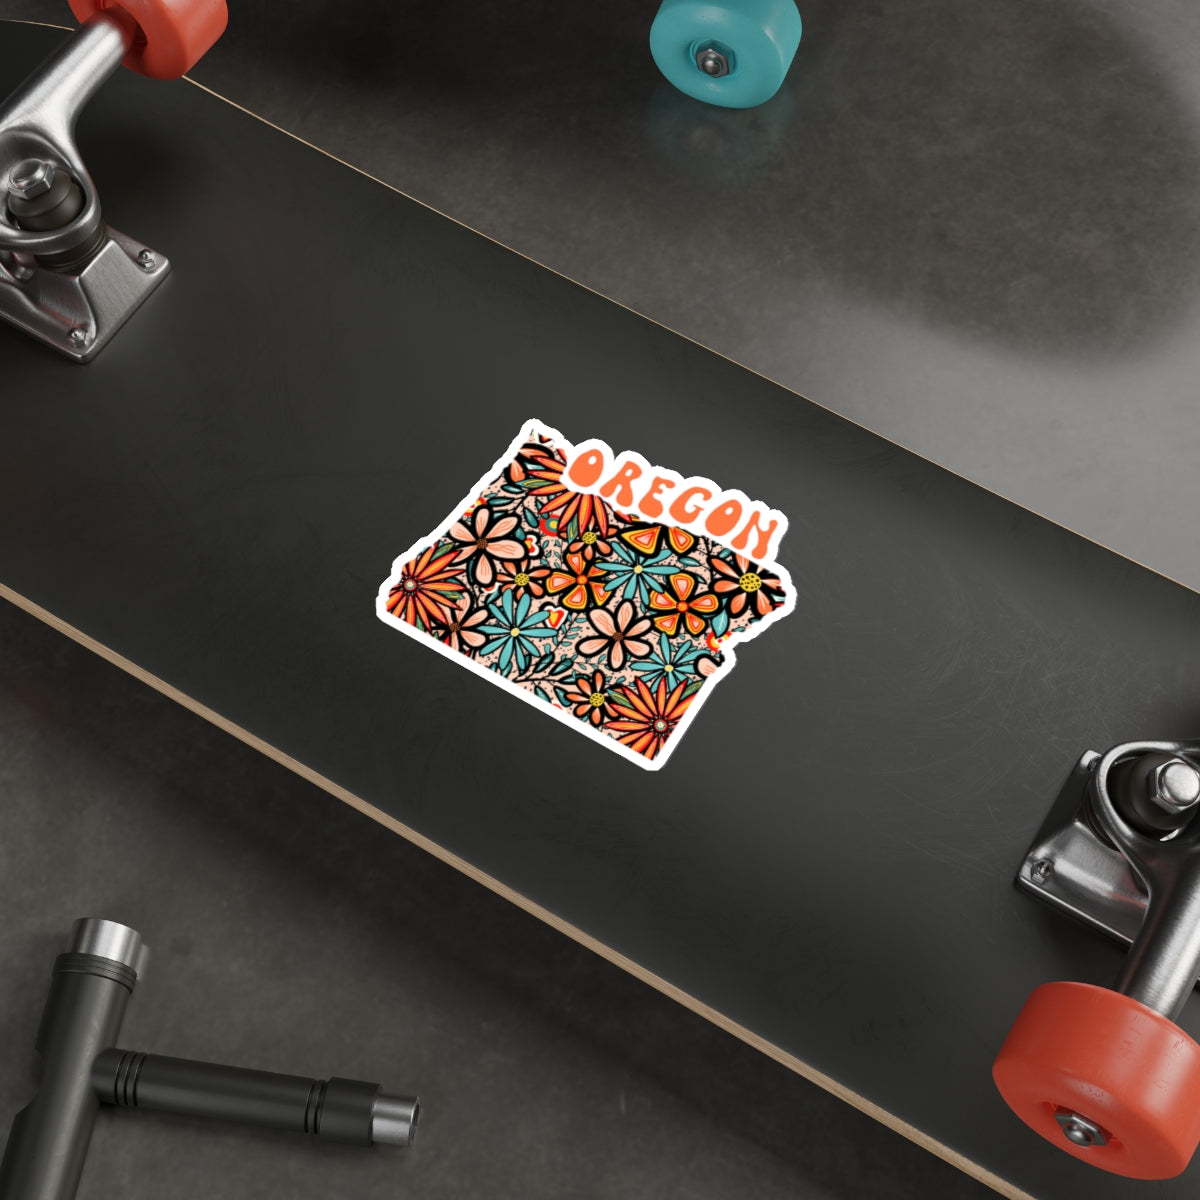 Oregon State Sticker | Vinyl Artist Designed Illustration Featuring Oregon State Filled With Retro Flowers with Retro Hand-Lettering Die-Cut Stickers